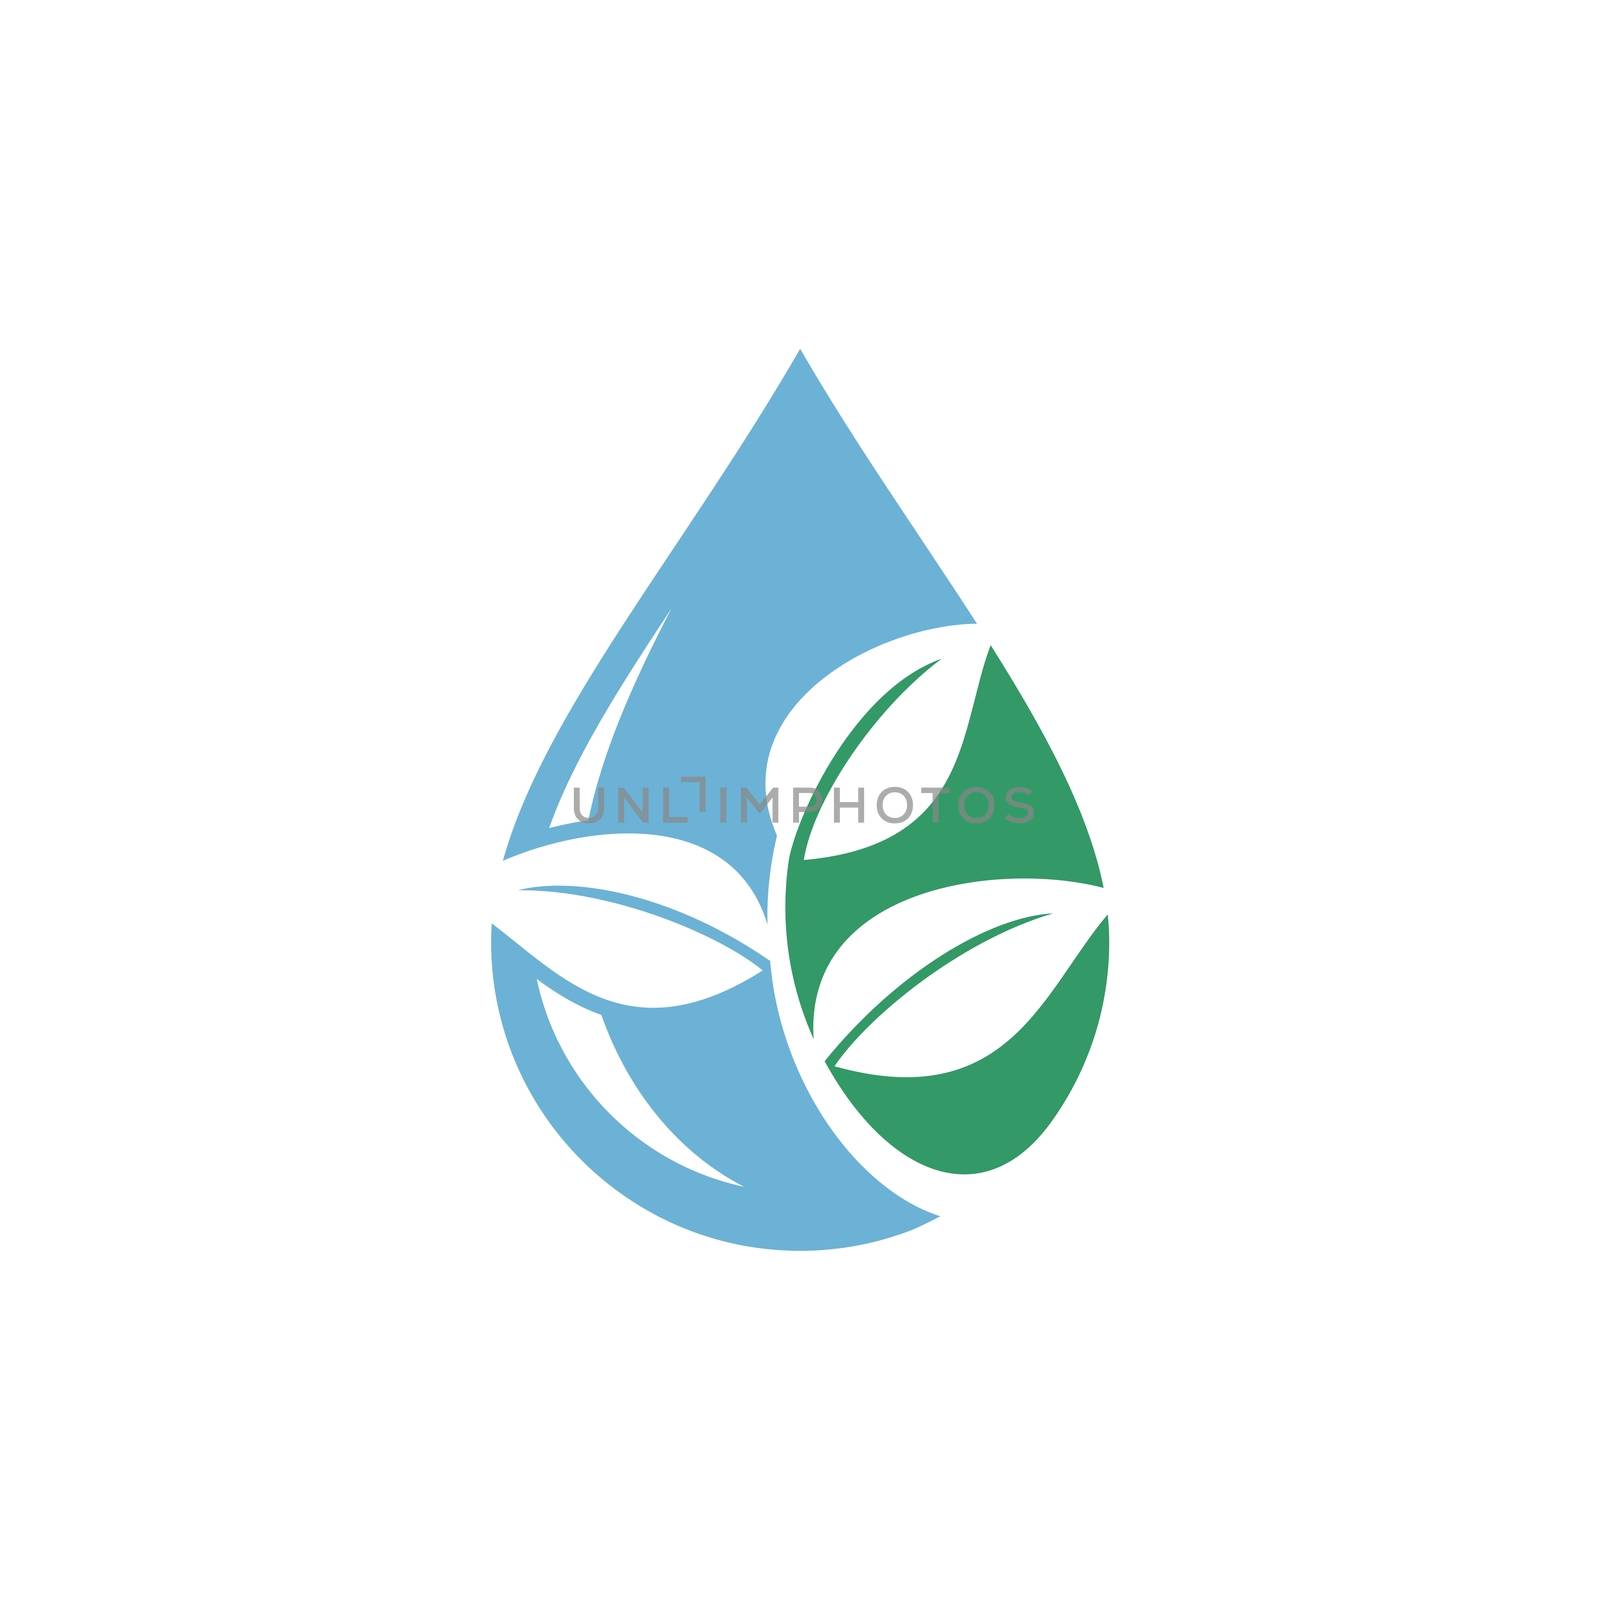 Drop Water Green Leaves Logo Template Illustration Design. Vector EPS 10. by soponyono1